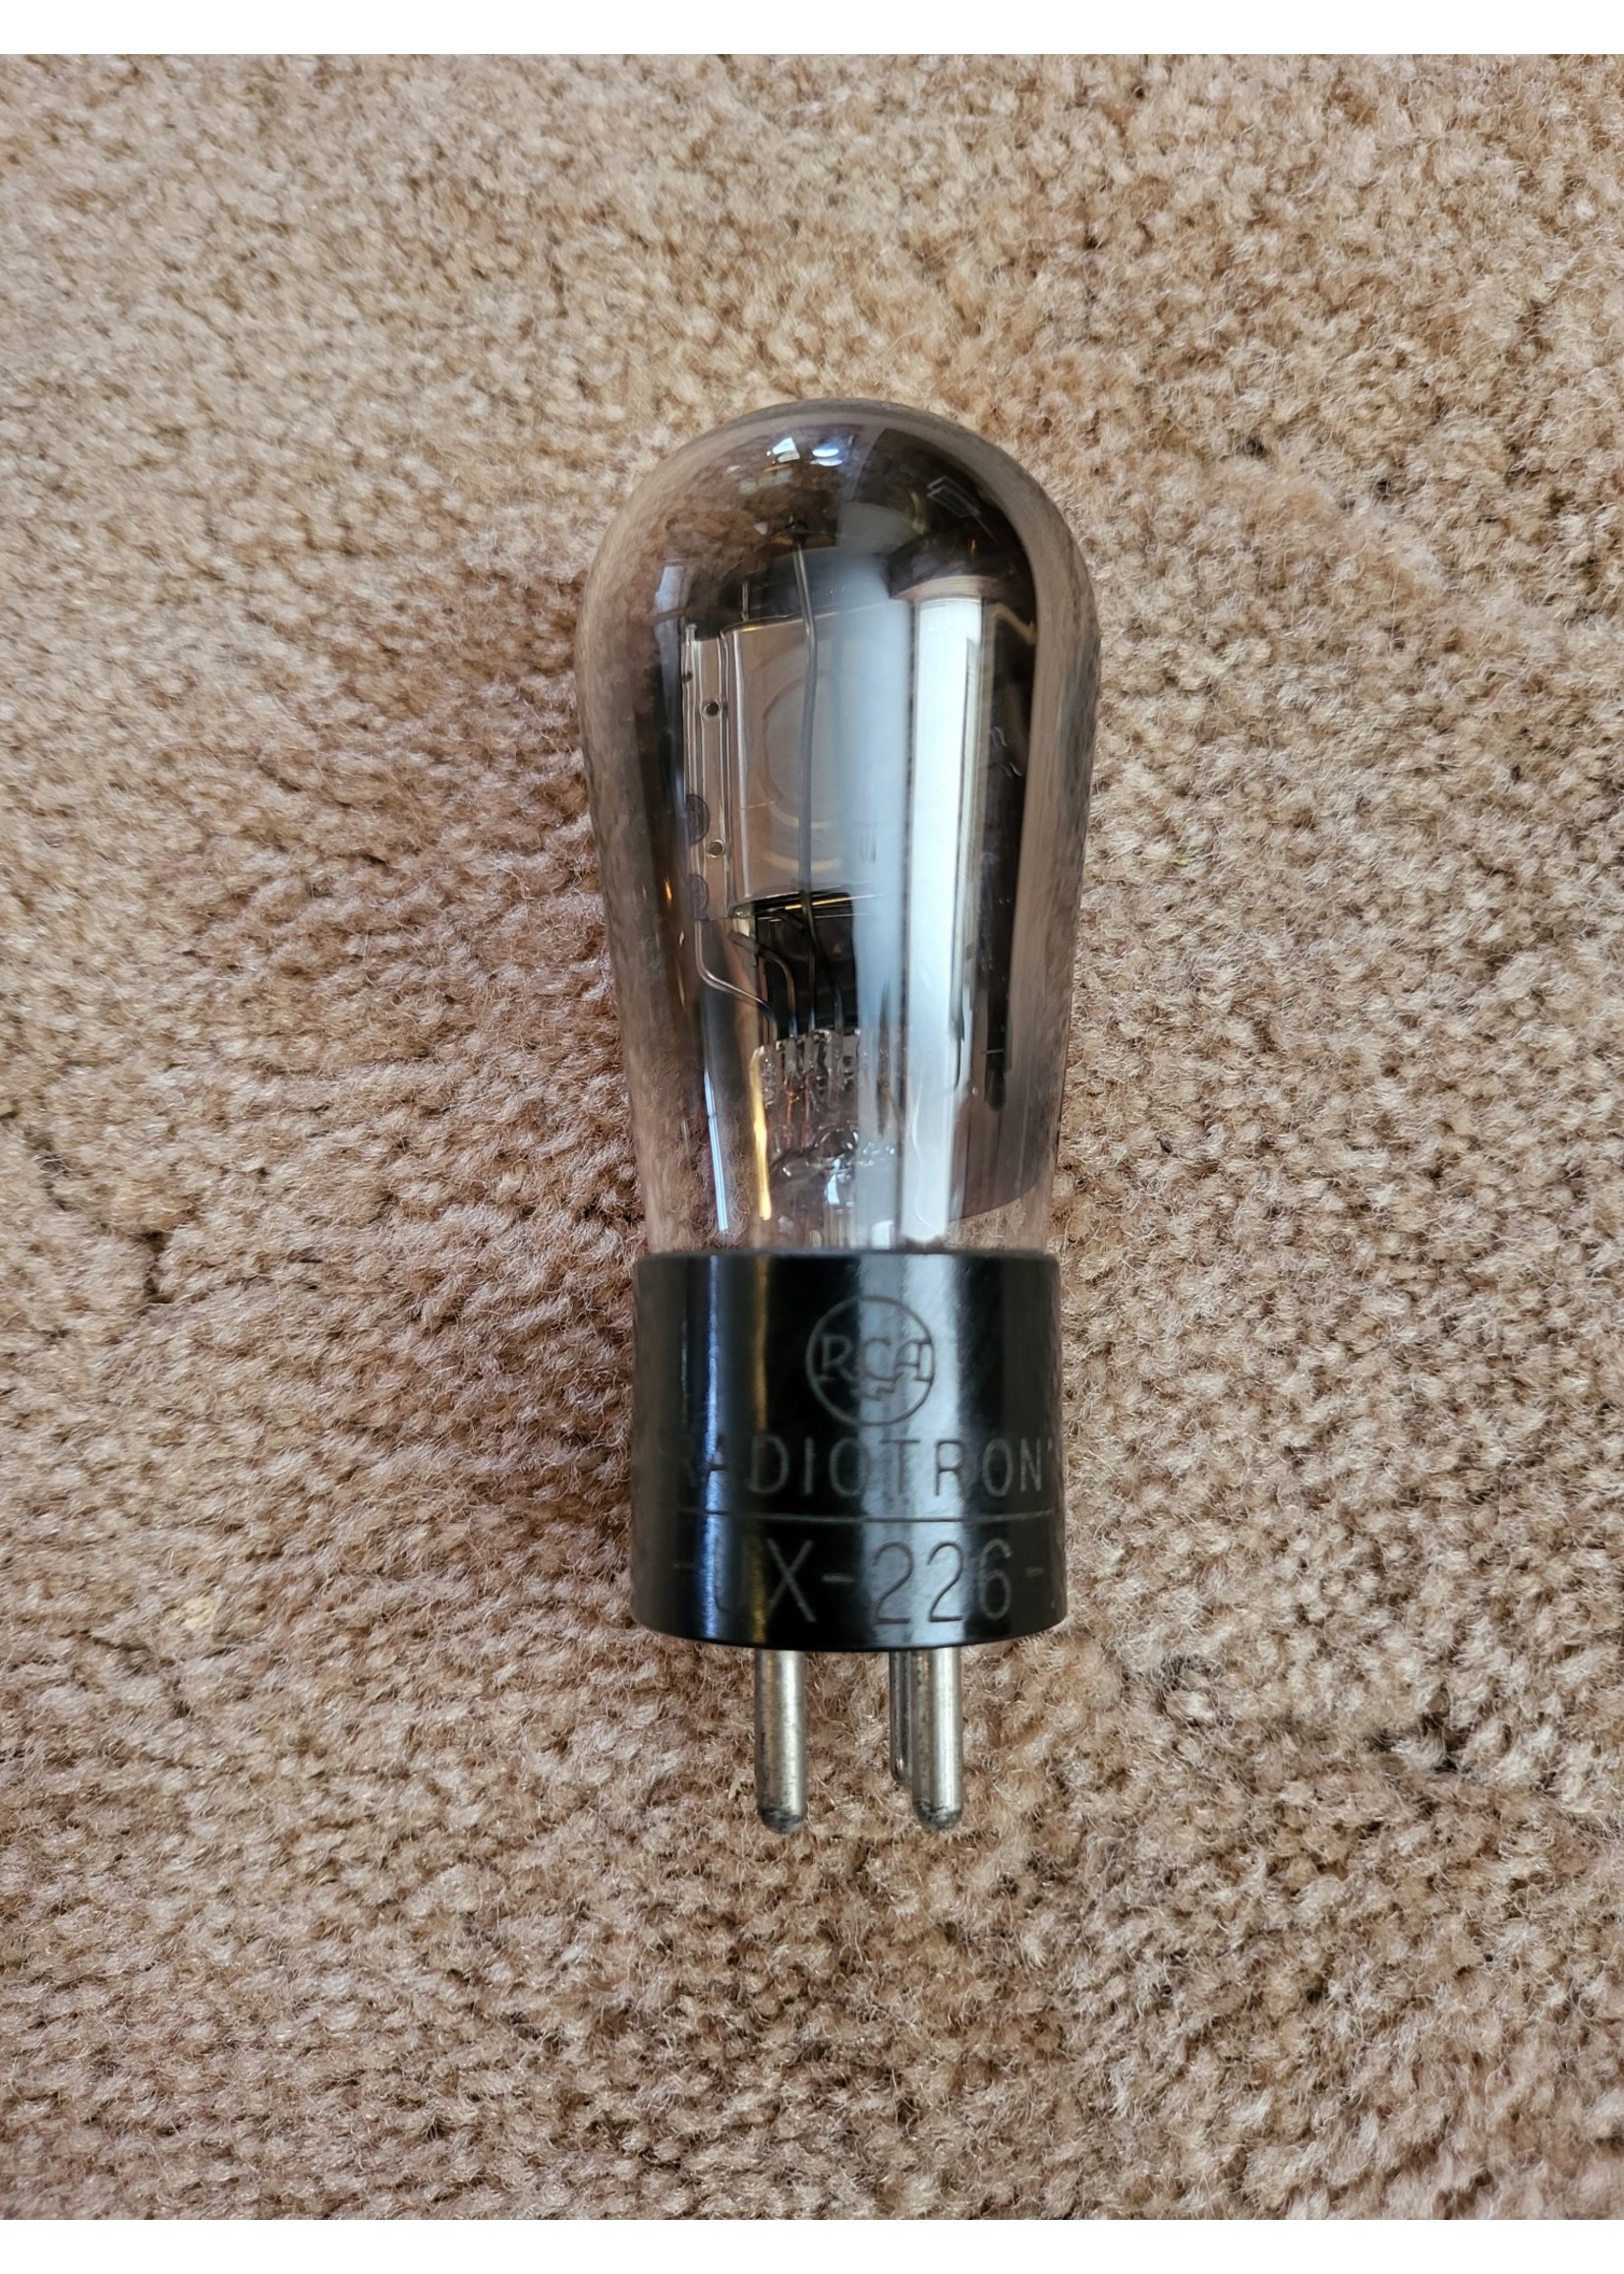 *Not Tested/As-Is (Actual Item May Vary From Photo, but Similar) RCA Radiotron Globe UX-226 Vacuum Tube Standard Pittsburgh